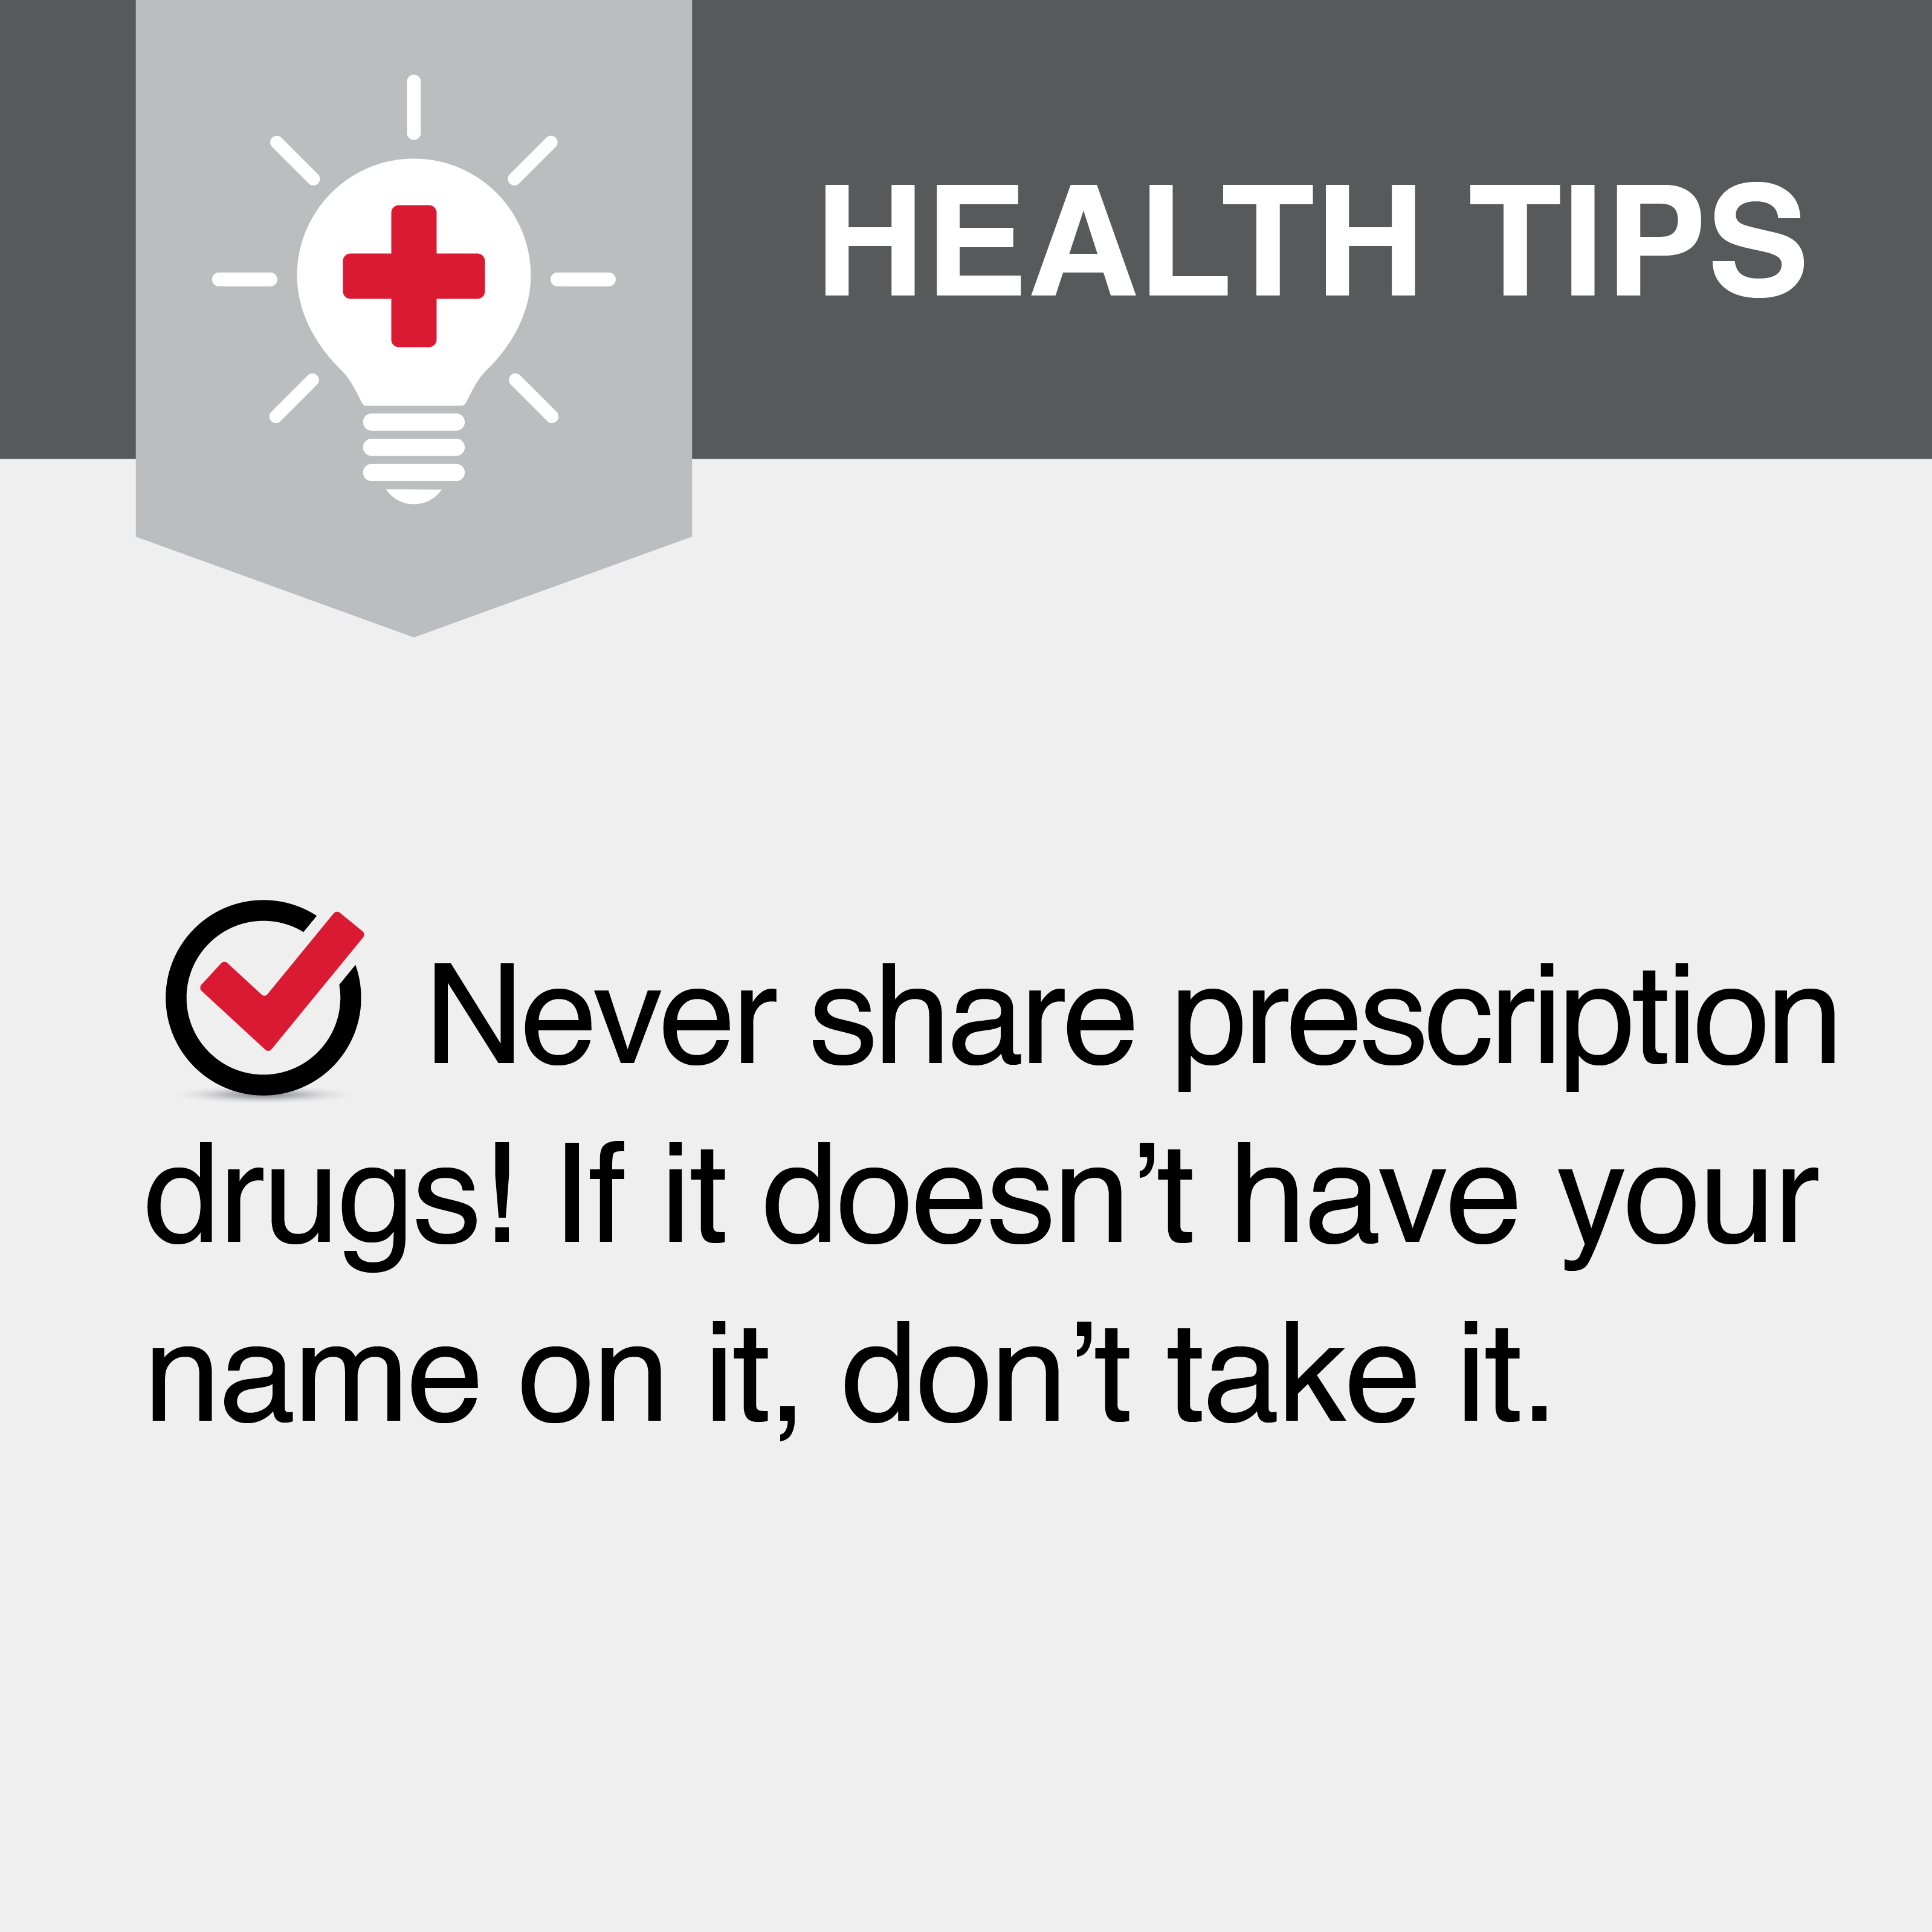 Never share prescription drugs! If it doesn't have your name on it, don't take it.